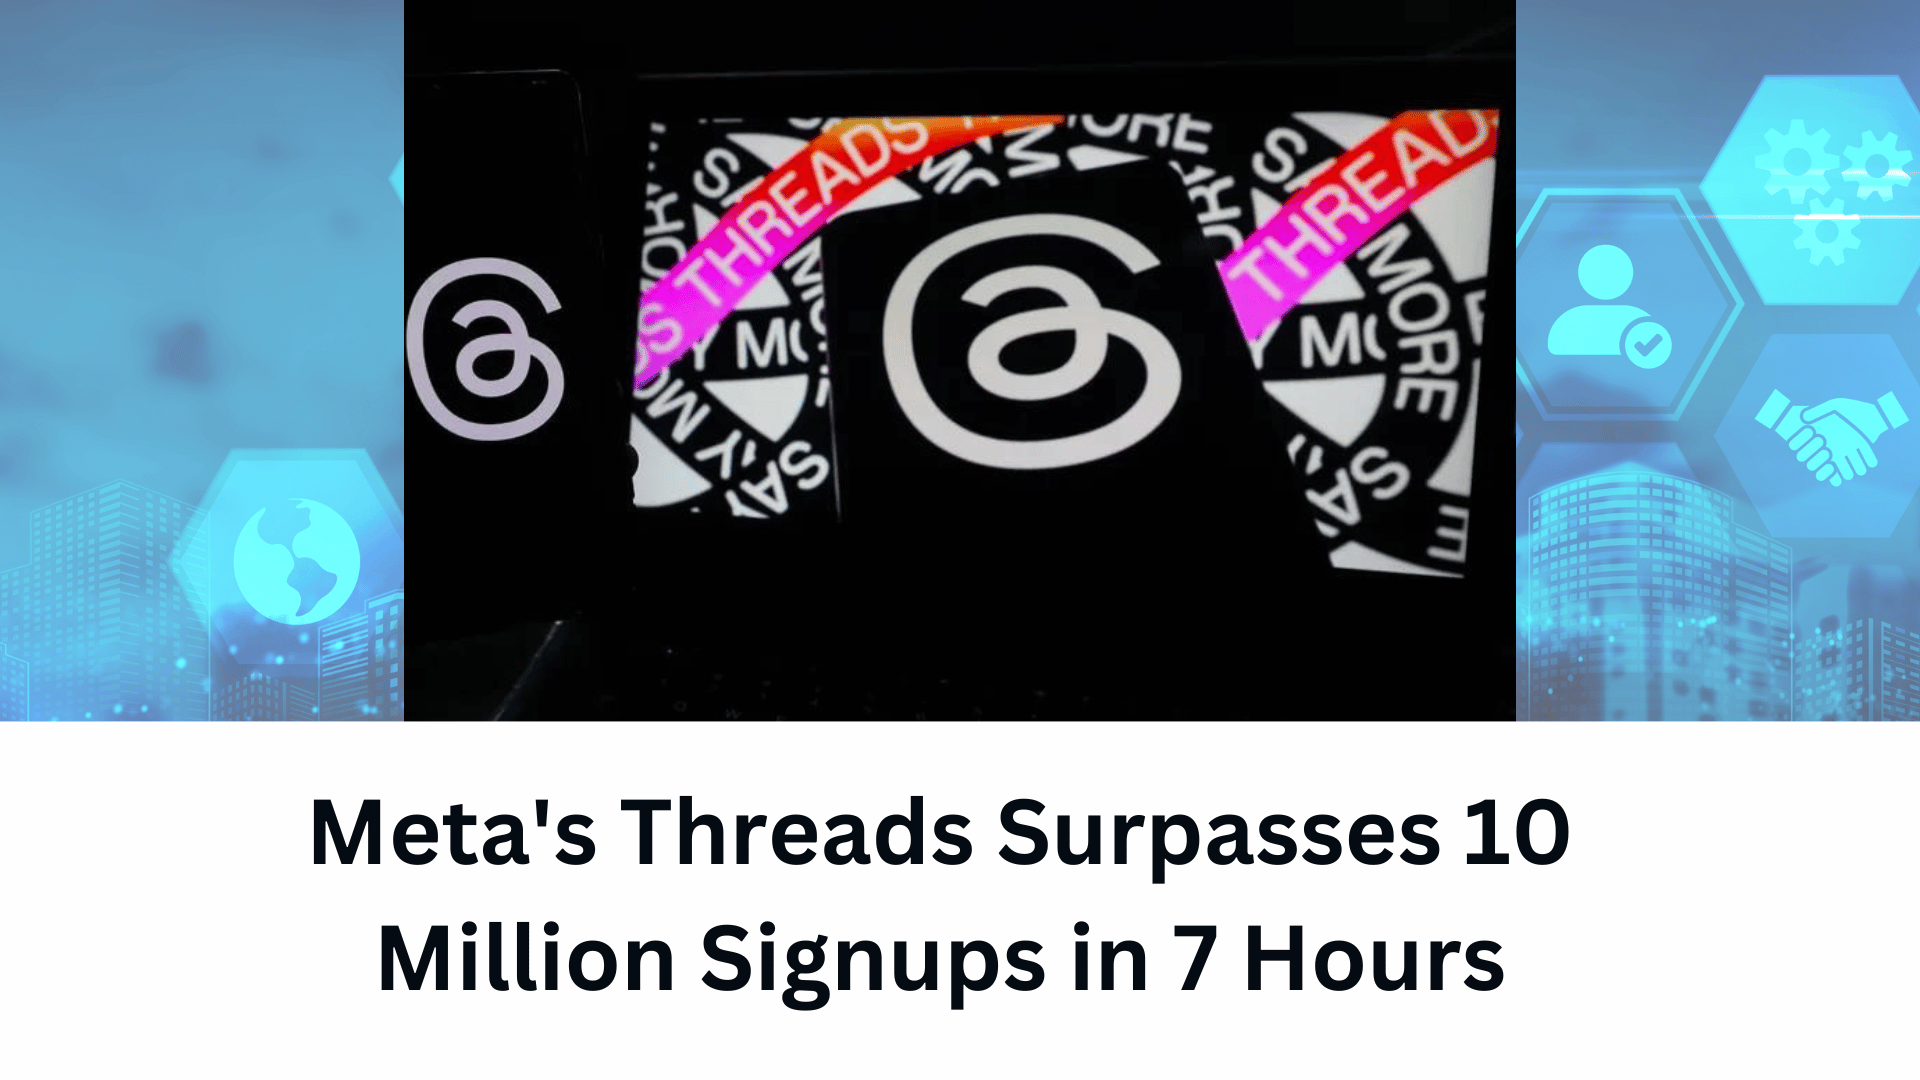 Meta's Threads Surpasses 10 Million Signups in 7 Hours